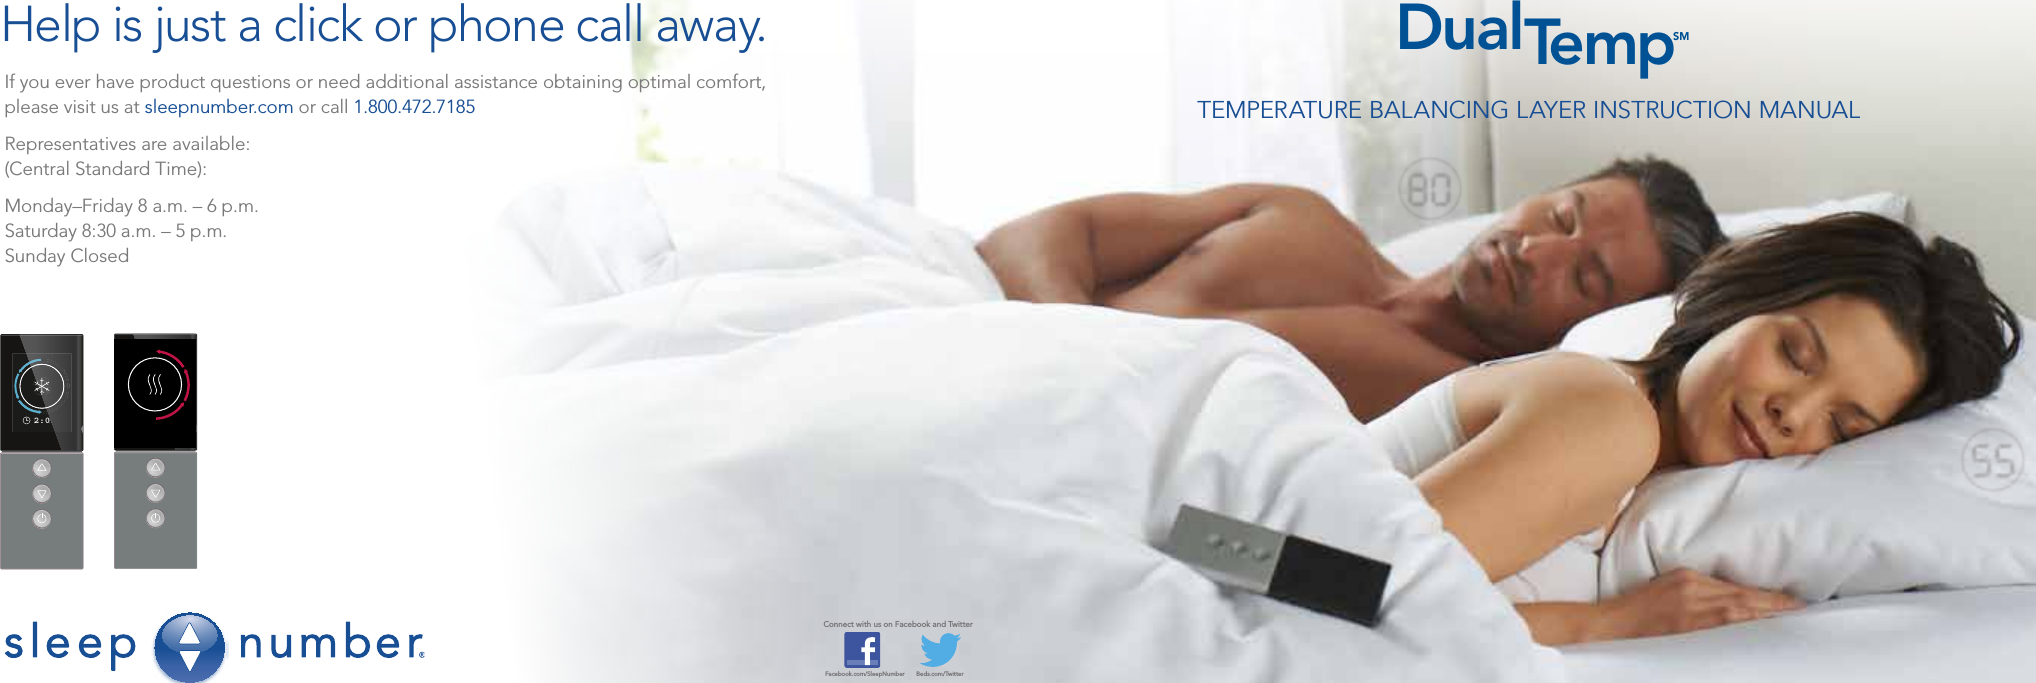 TEMPERATURE BALANCING LAYER INSTRUCTION MANUALDualTempSMIf you ever have product questions or need additional assistance obtaining optimal comfort, please visit us at sleepnumber.com or call 1.800.472.7185Representatives are available:(Central Standard Time):Monday–Friday 8 a.m. – 6 p.m.Saturday 8:30 a.m. – 5 p.m.Sunday ClosedConnect with us on Facebook and TwitterFacebook.com/SleepNumber       Beds.com/TwitterHelp is just a click or phone call away.2:00 2:00Sara